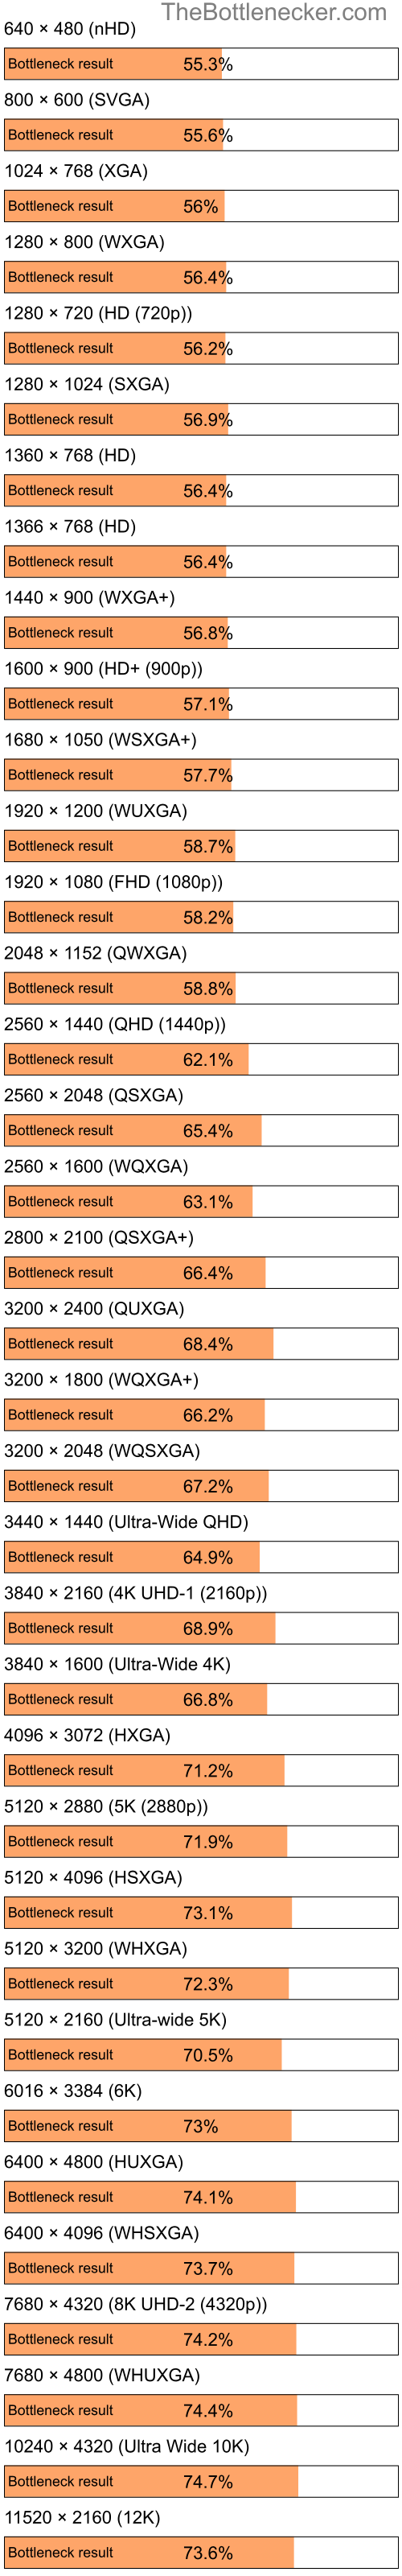 Bottleneck results by resolution for Intel Celeron M 420 and AMD M880G with Mobility Radeon HD 4200 in Processor Intense Tasks